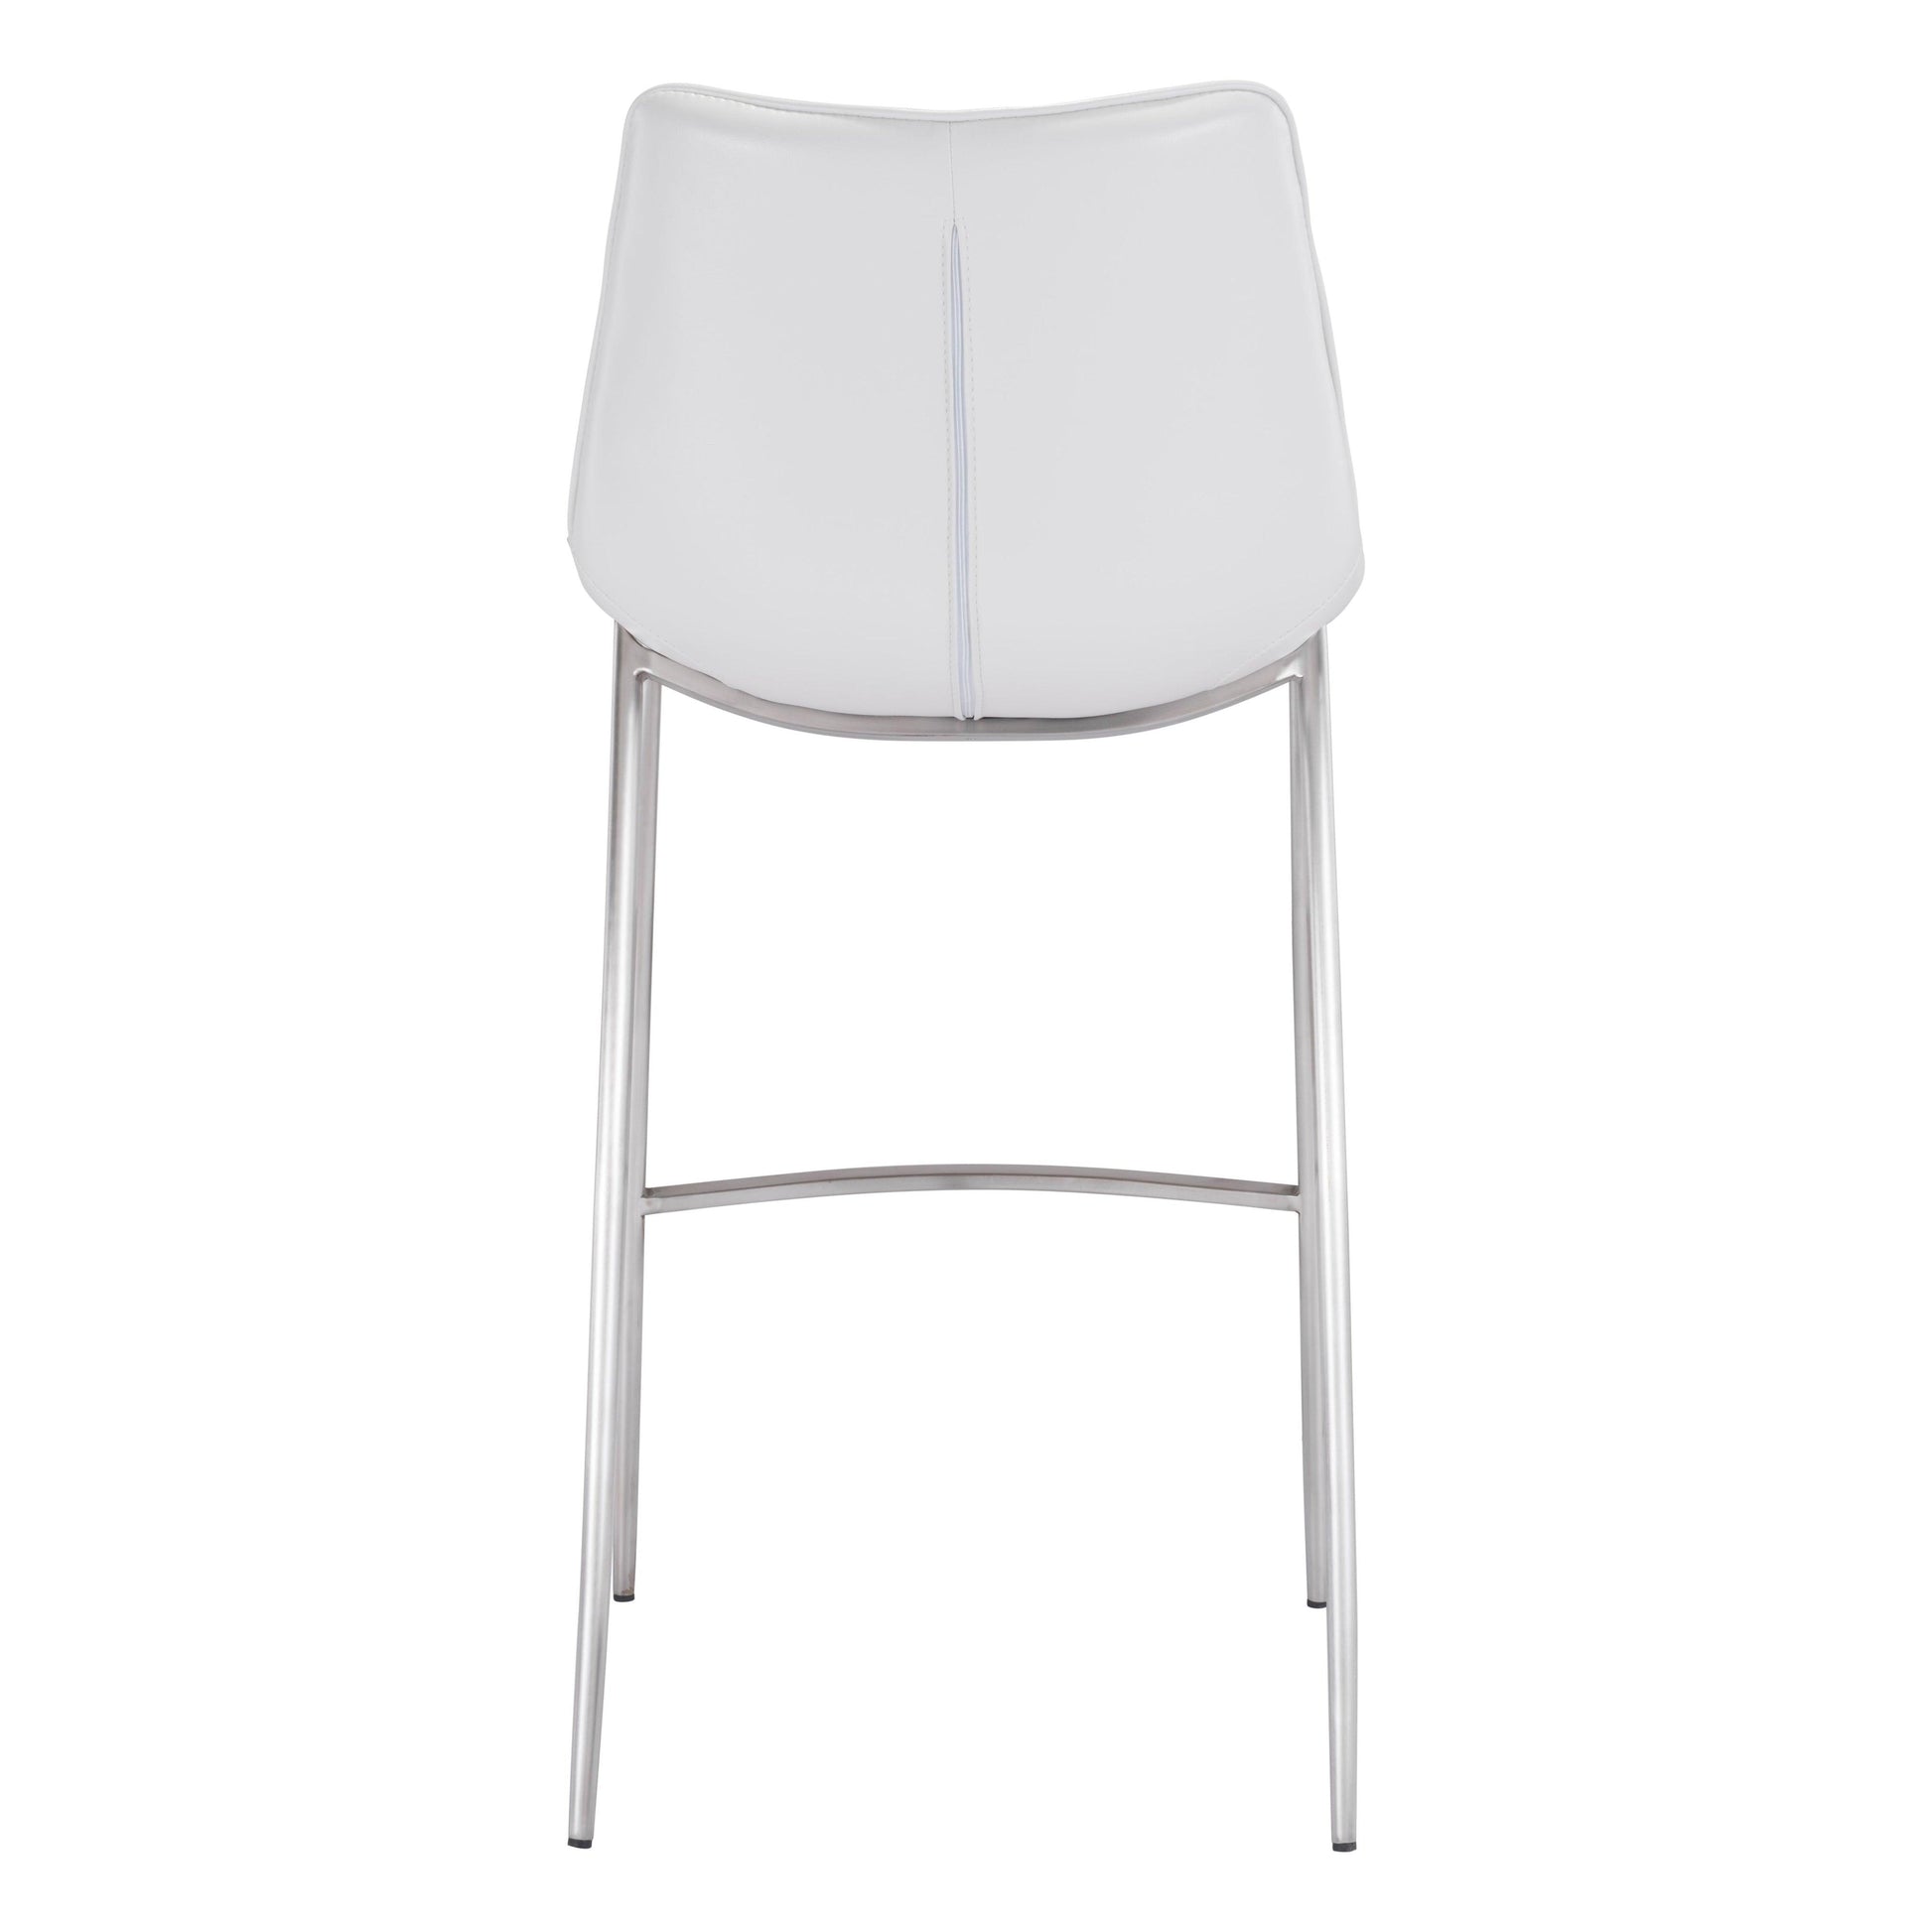 Magnus Bar Chair (Set of 2) White & Silver - Sideboards and Things Back Type_Full Back, Back Type_With Back, Brand_Zuo Modern, Color_Silver, Color_White, Depth_20-30, Finish_Brushed, Height_40-50, Materials_Metal, Materials_Upholstery, Metal Type_Steel, Number of Pieces_2PC Set, Product Type_Bar Height, Shape_Armless, Upholstery Type_Leather, Upholstery Type_Vegan Leather, Width_20-30